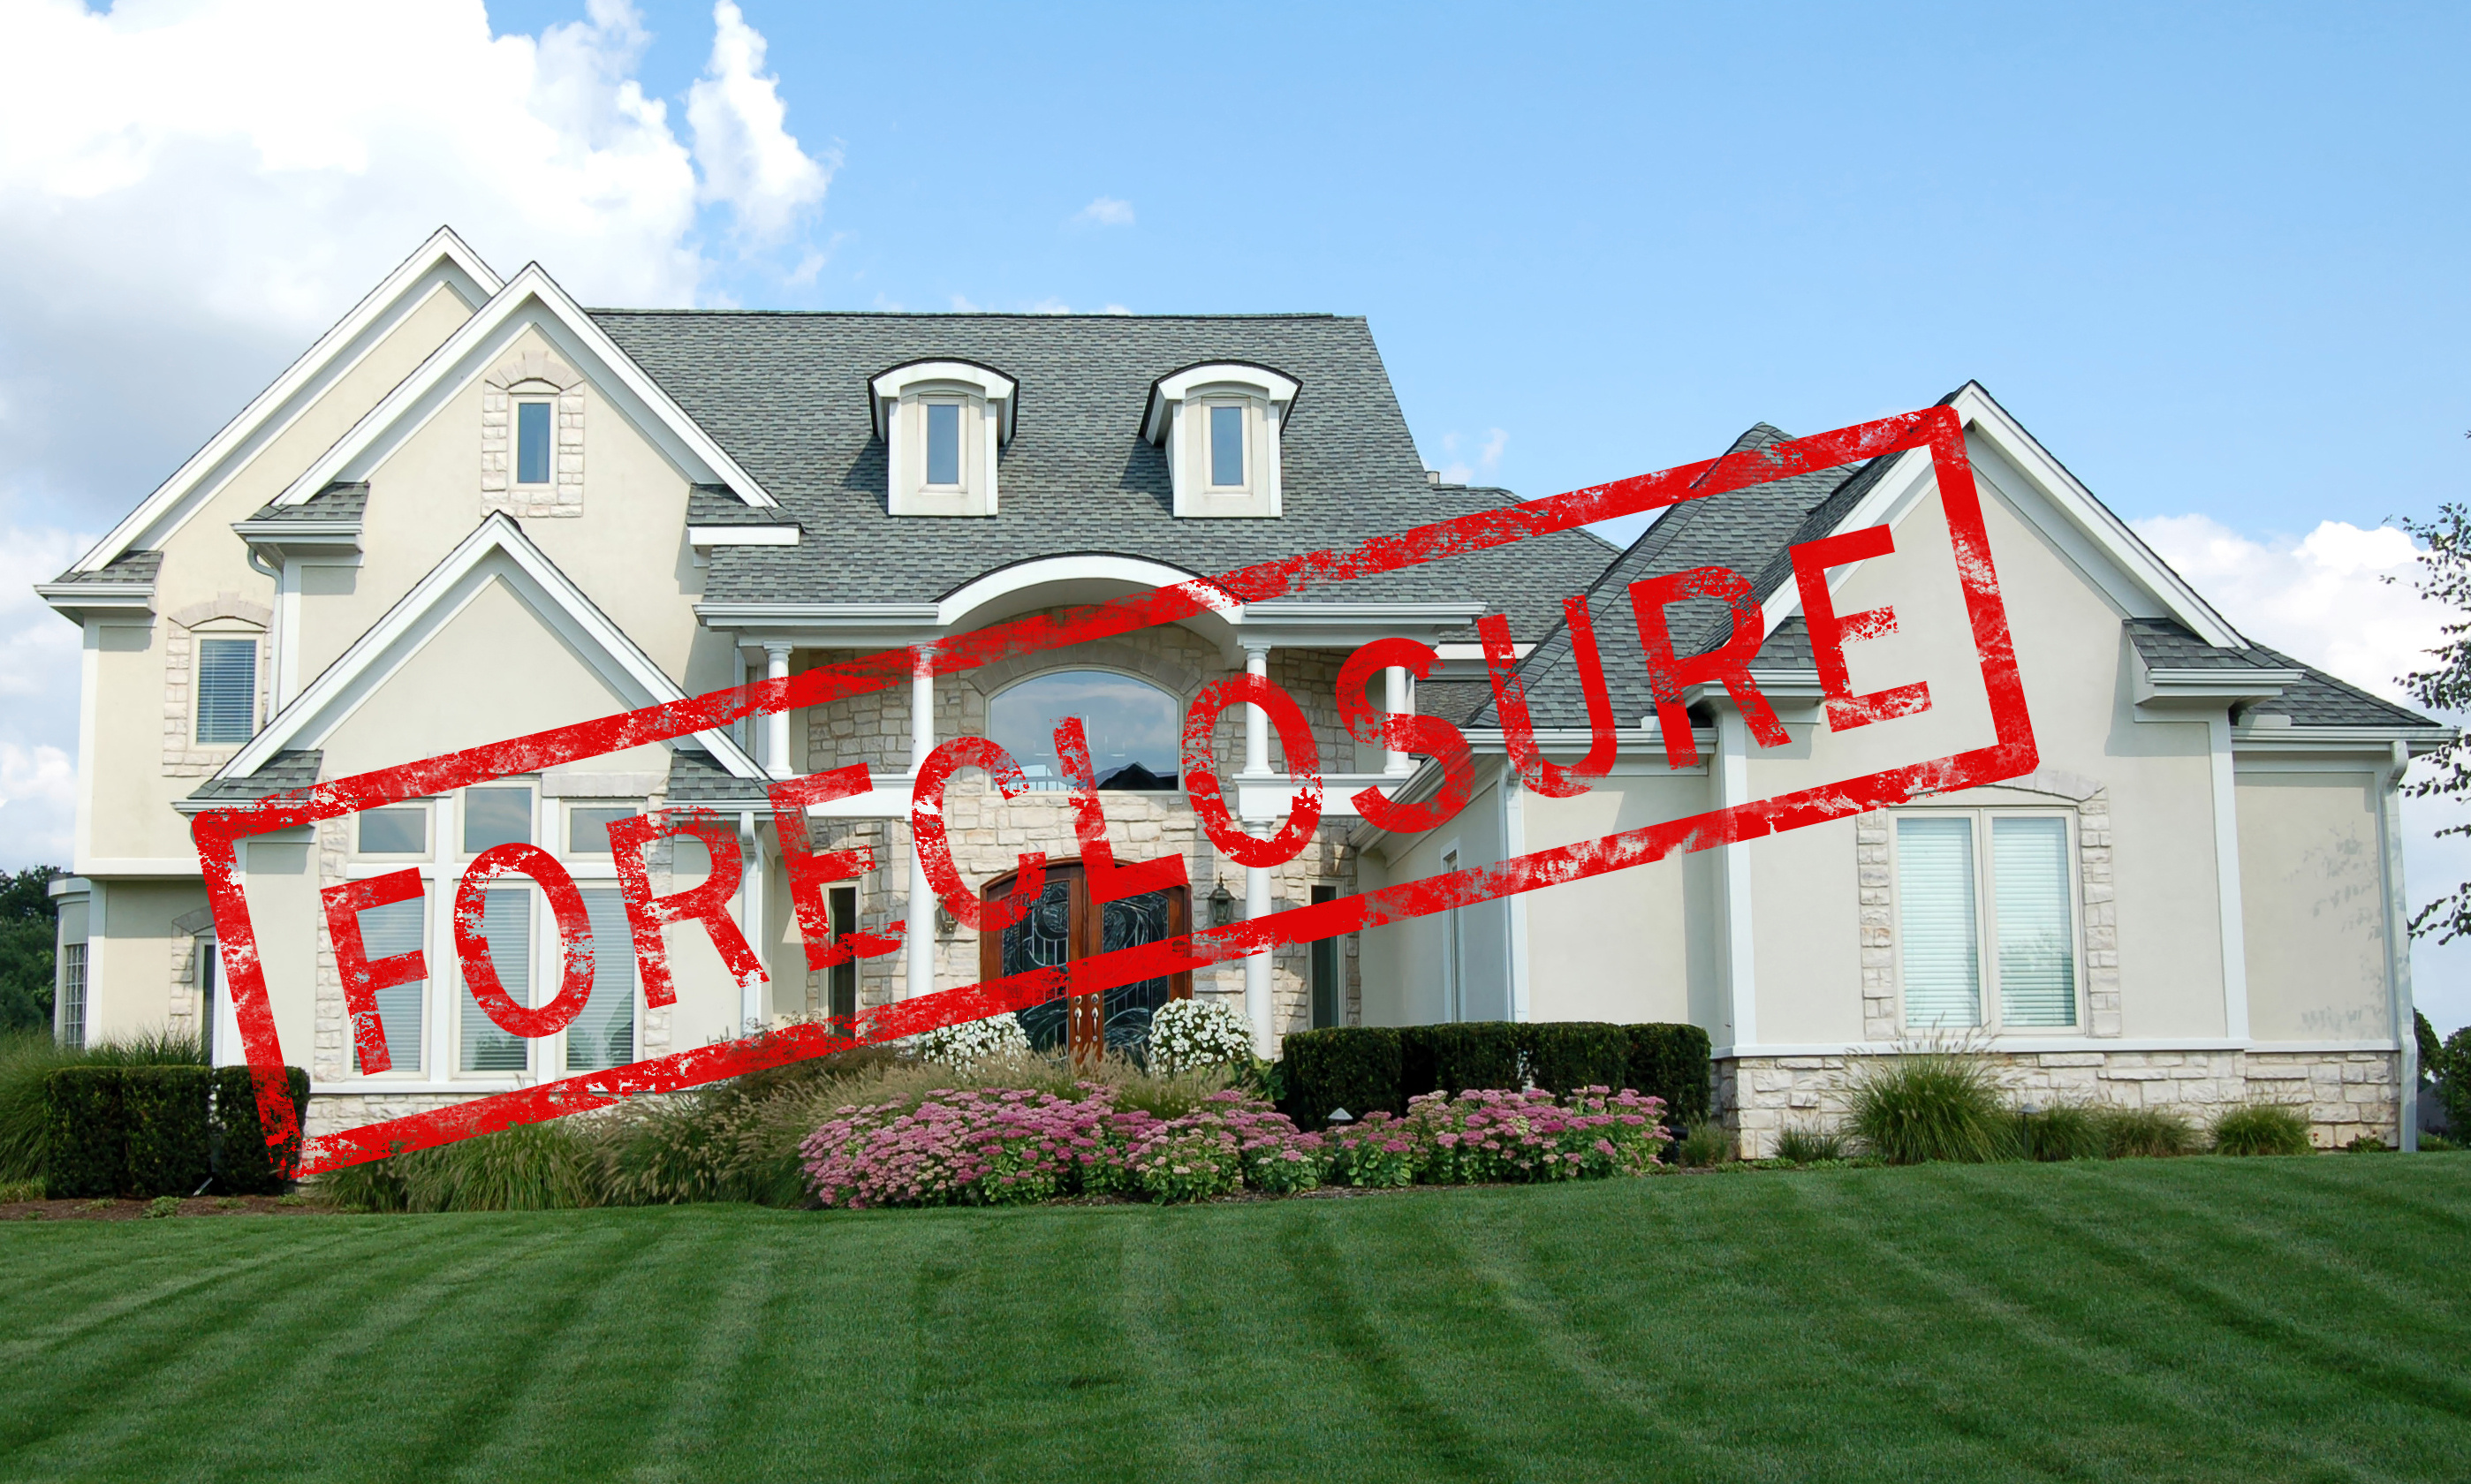 Call Lincoln Appraisal Group when you need appraisals on Wilcox foreclosures